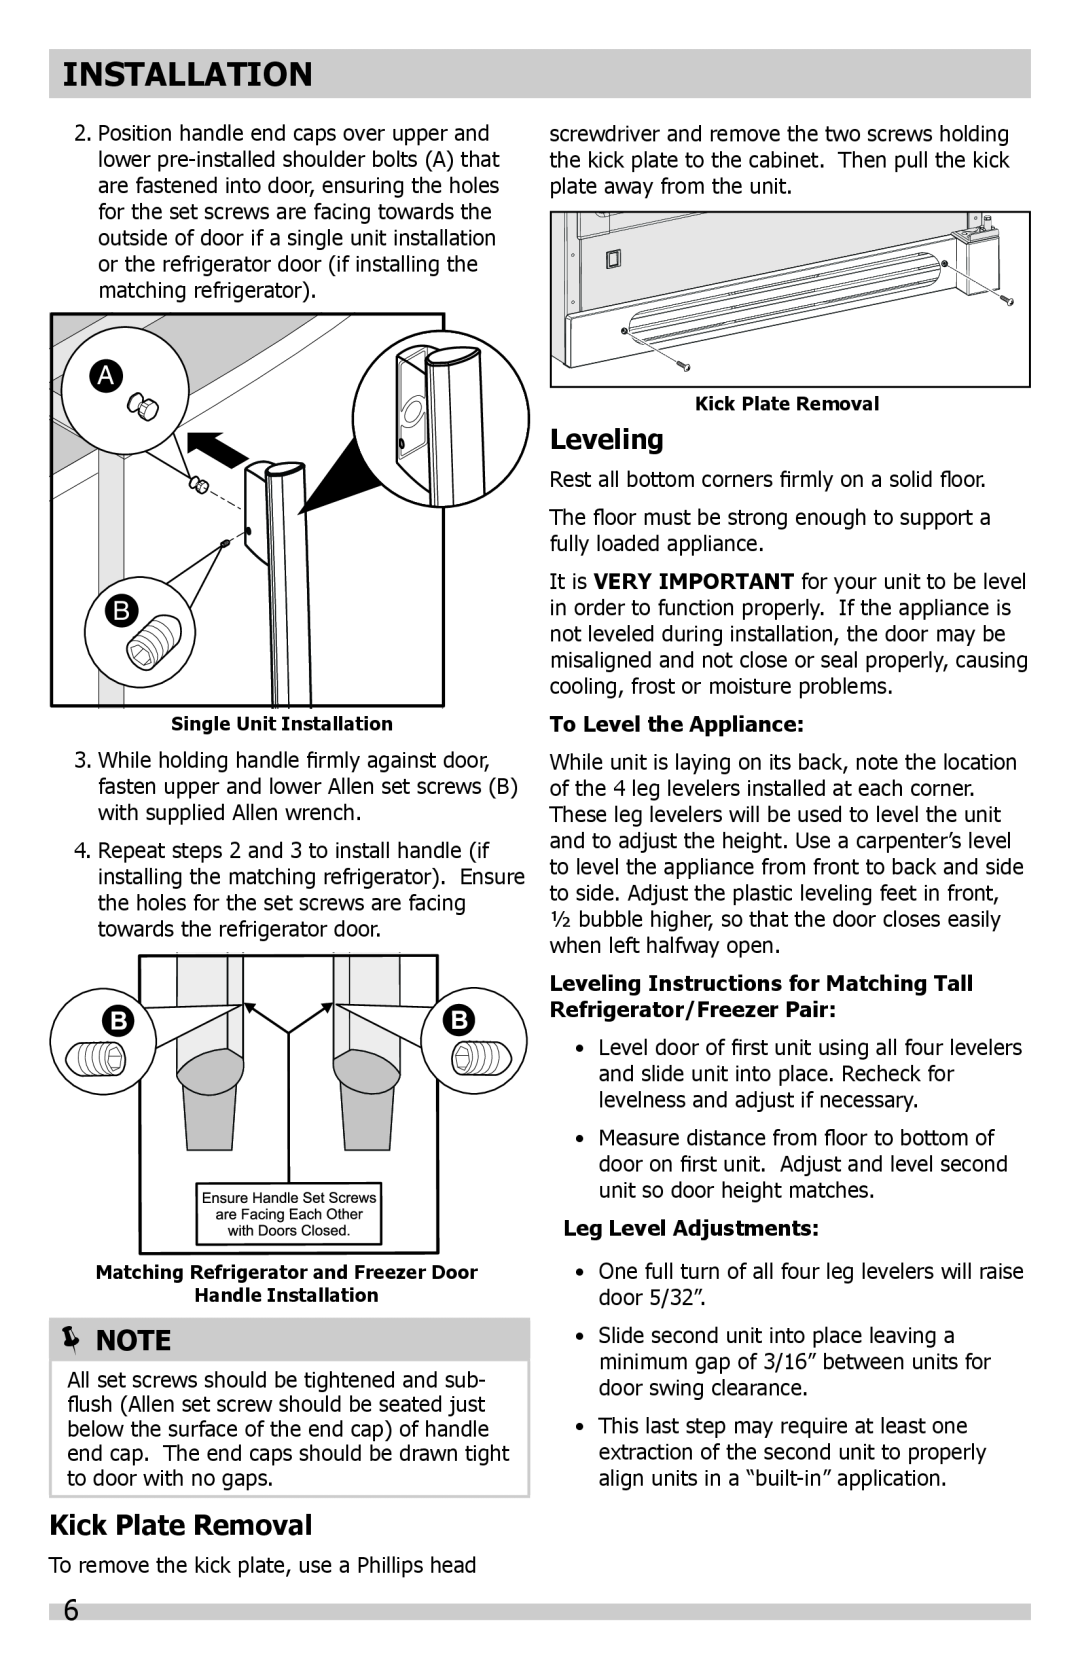 Frigidaire A01060901 Kick Plate Removal, Installation,  Note, Leveling, To Level the Appliance, Leg Level Adjustments 